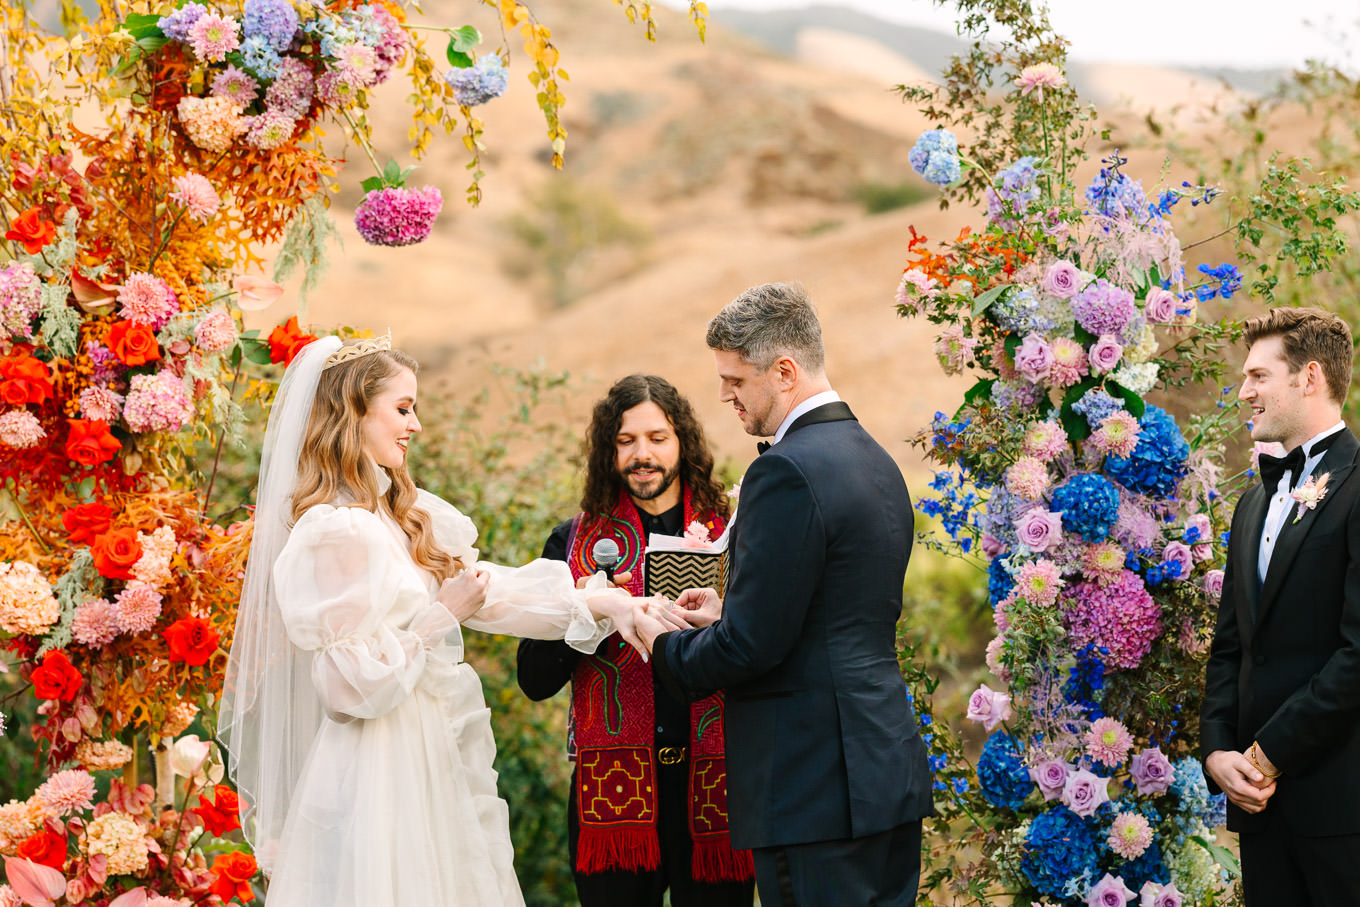 Allison Harvard & Jeremy Burke's floral-filled wedding ceremony | Colorful and quirky wedding at Higuera Ranch in San Luis Obispo | #sanluisobispowedding #californiawedding #higueraranch #madonnainn   
Source: Mary Costa Photography | Los Angeles